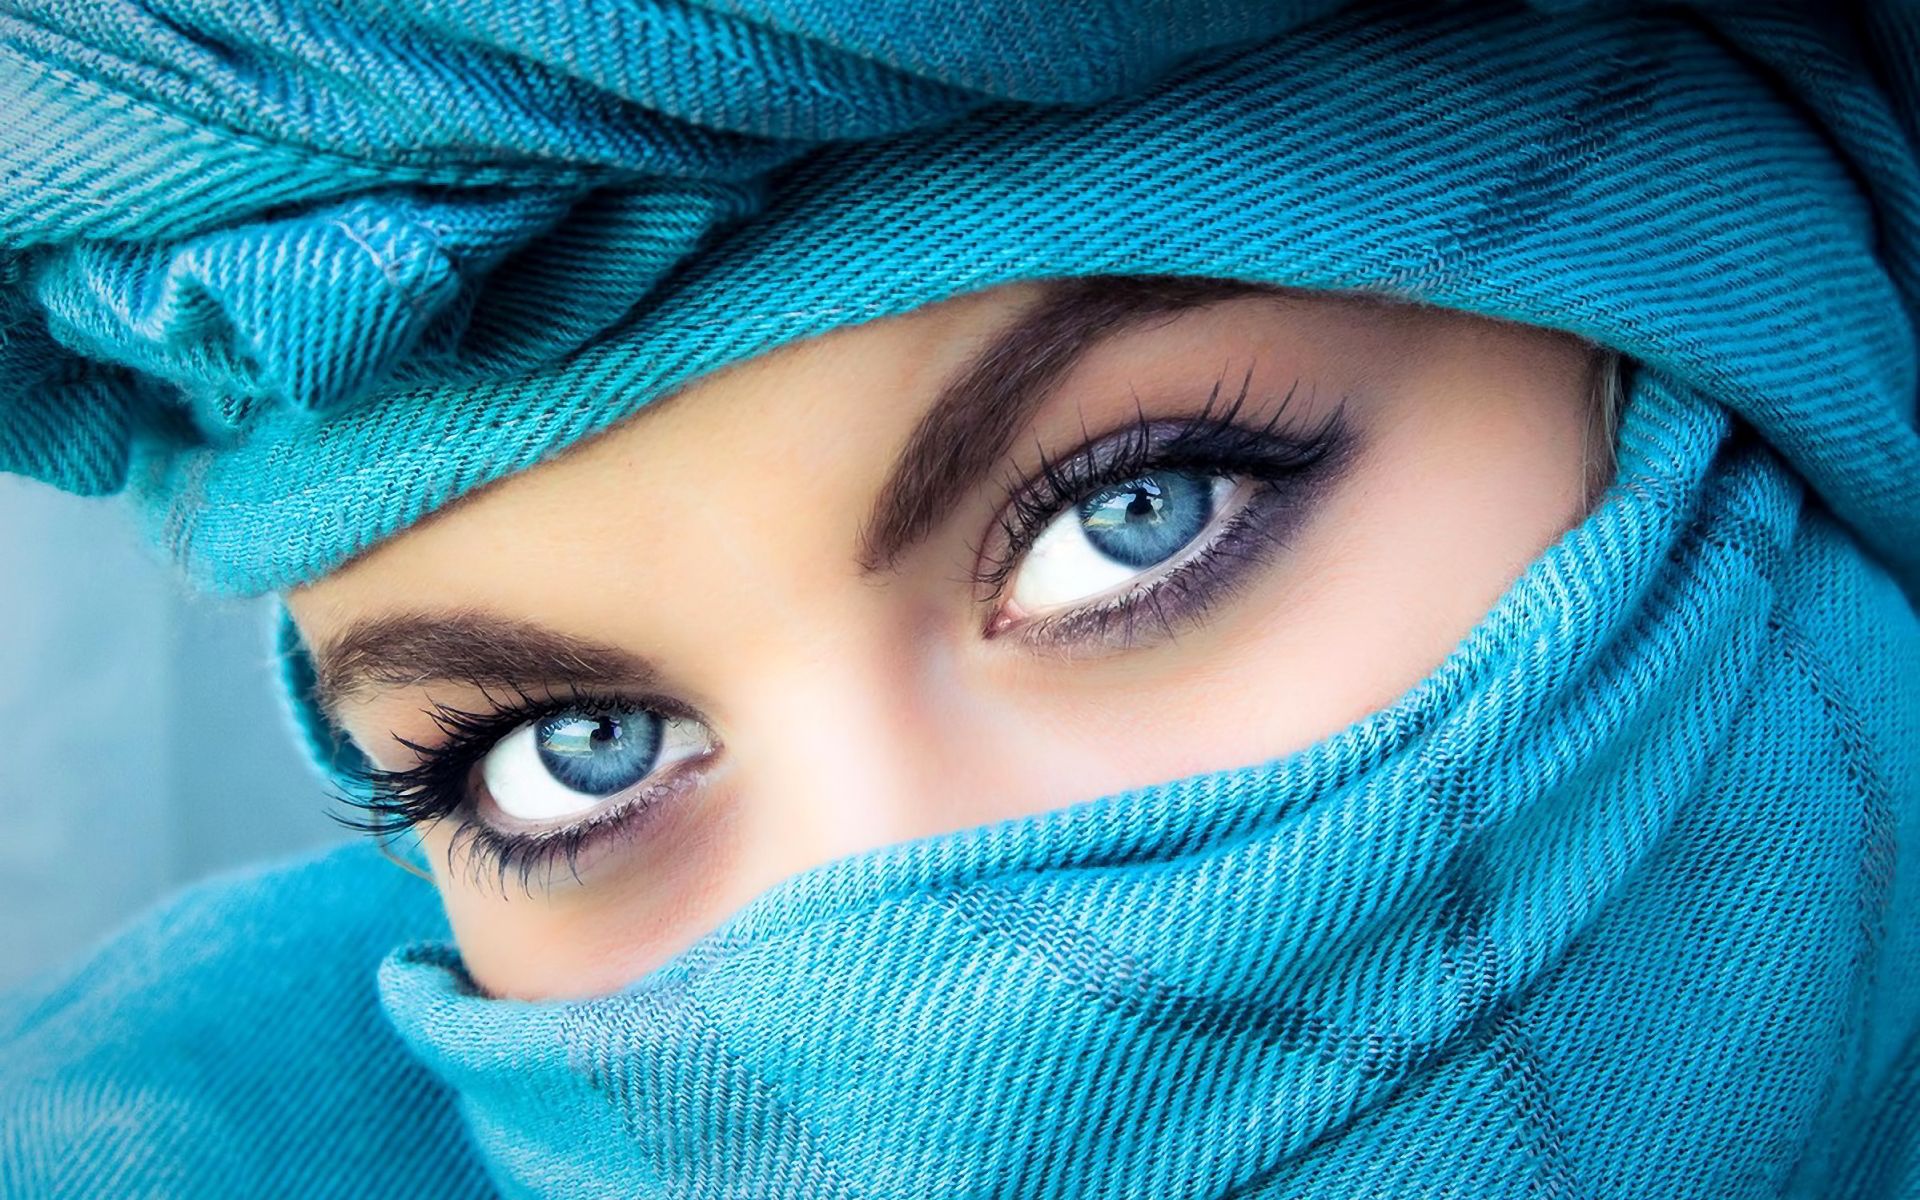 Best Attractive Woman With Veil In The Head A Over Blue Wallpaper